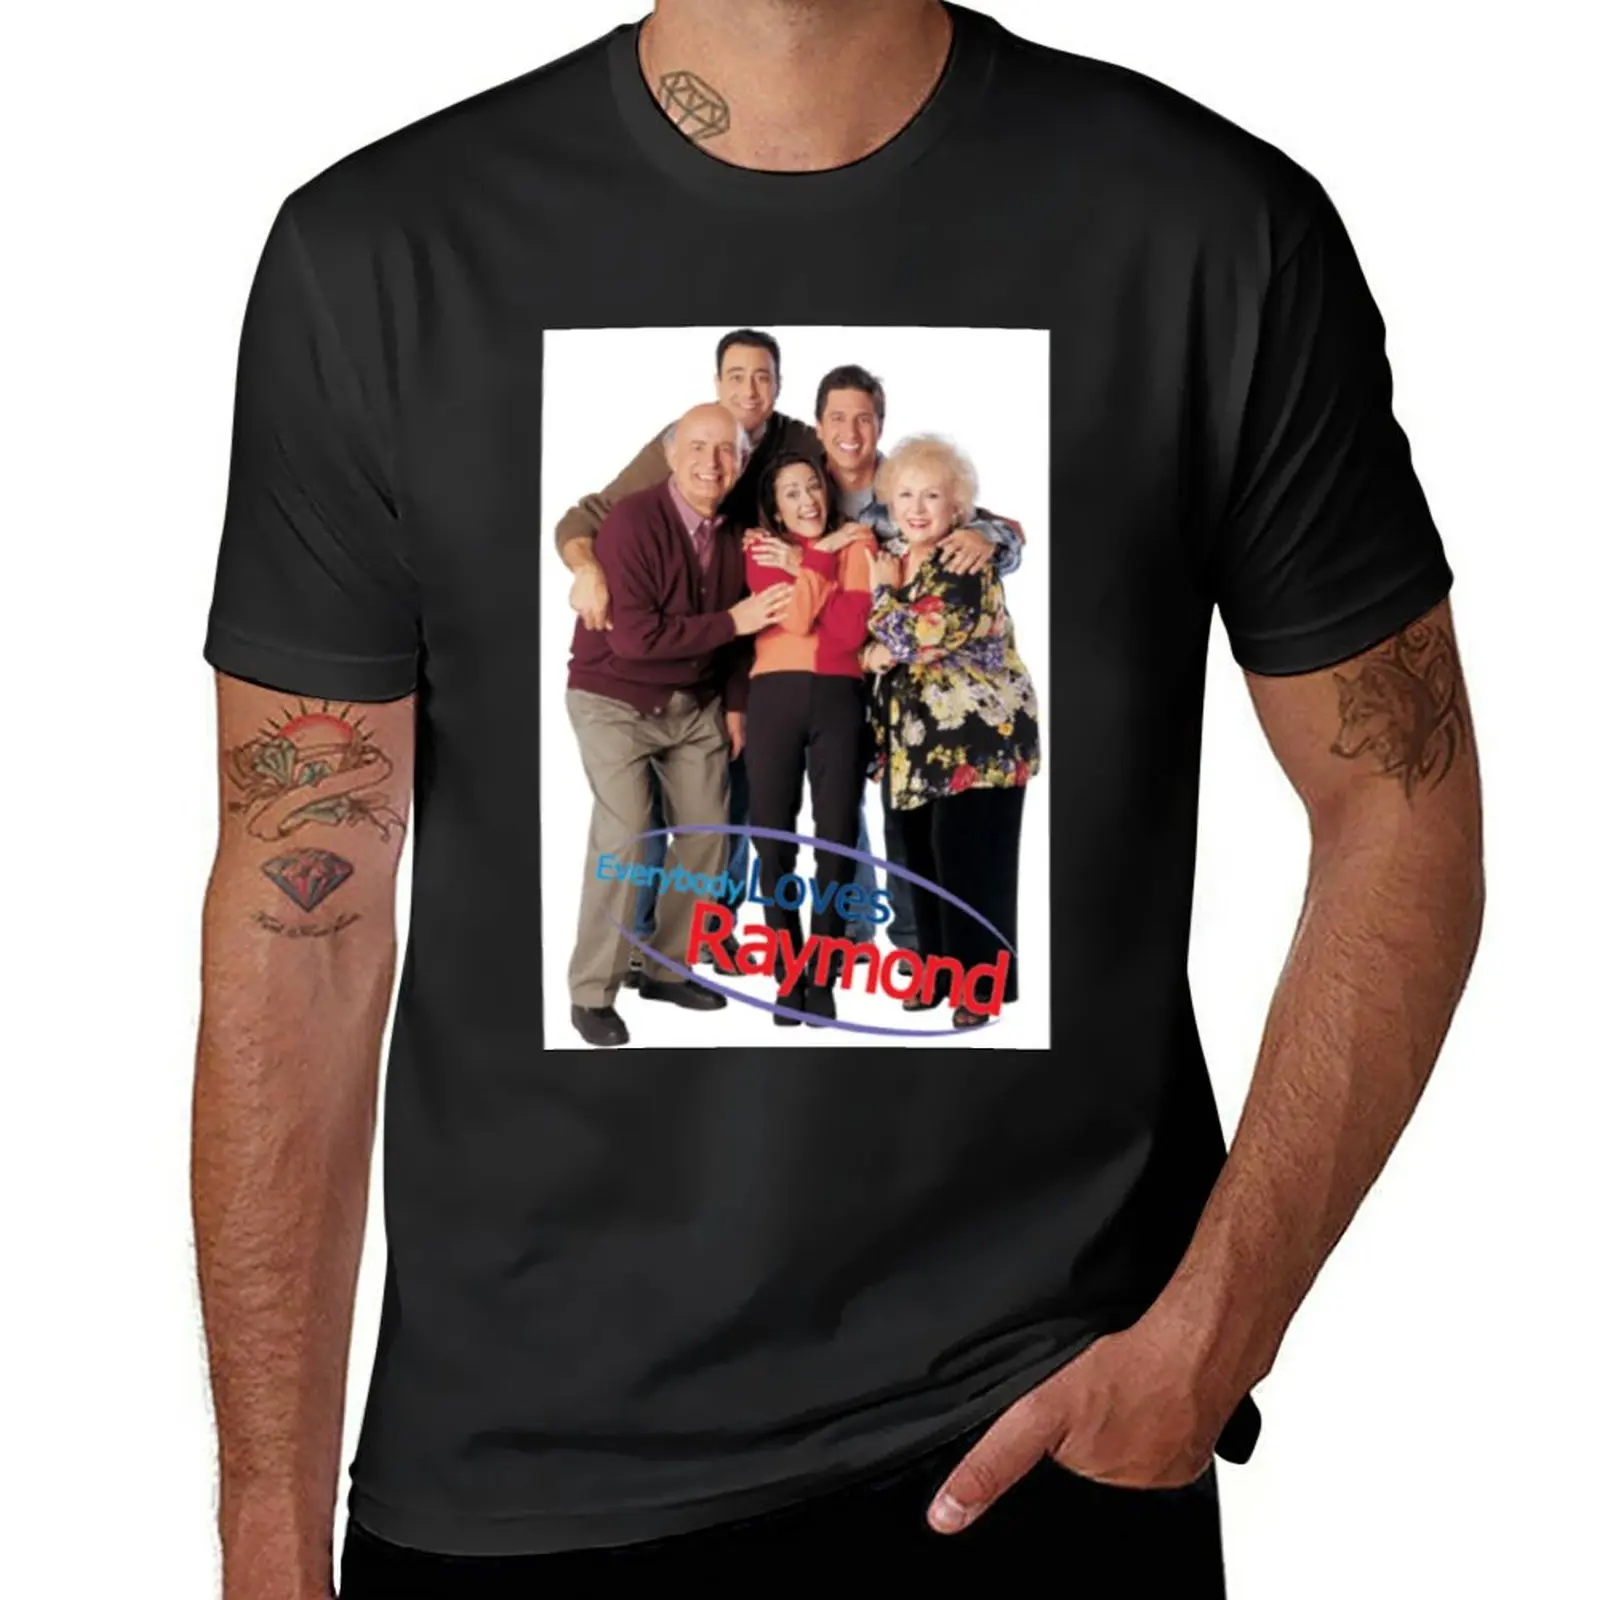 

New Everybody Loves Raymond Tee 90's Vintage TV Show Cool Retro Fan T-Shirt man clothes tees black t shirts for men